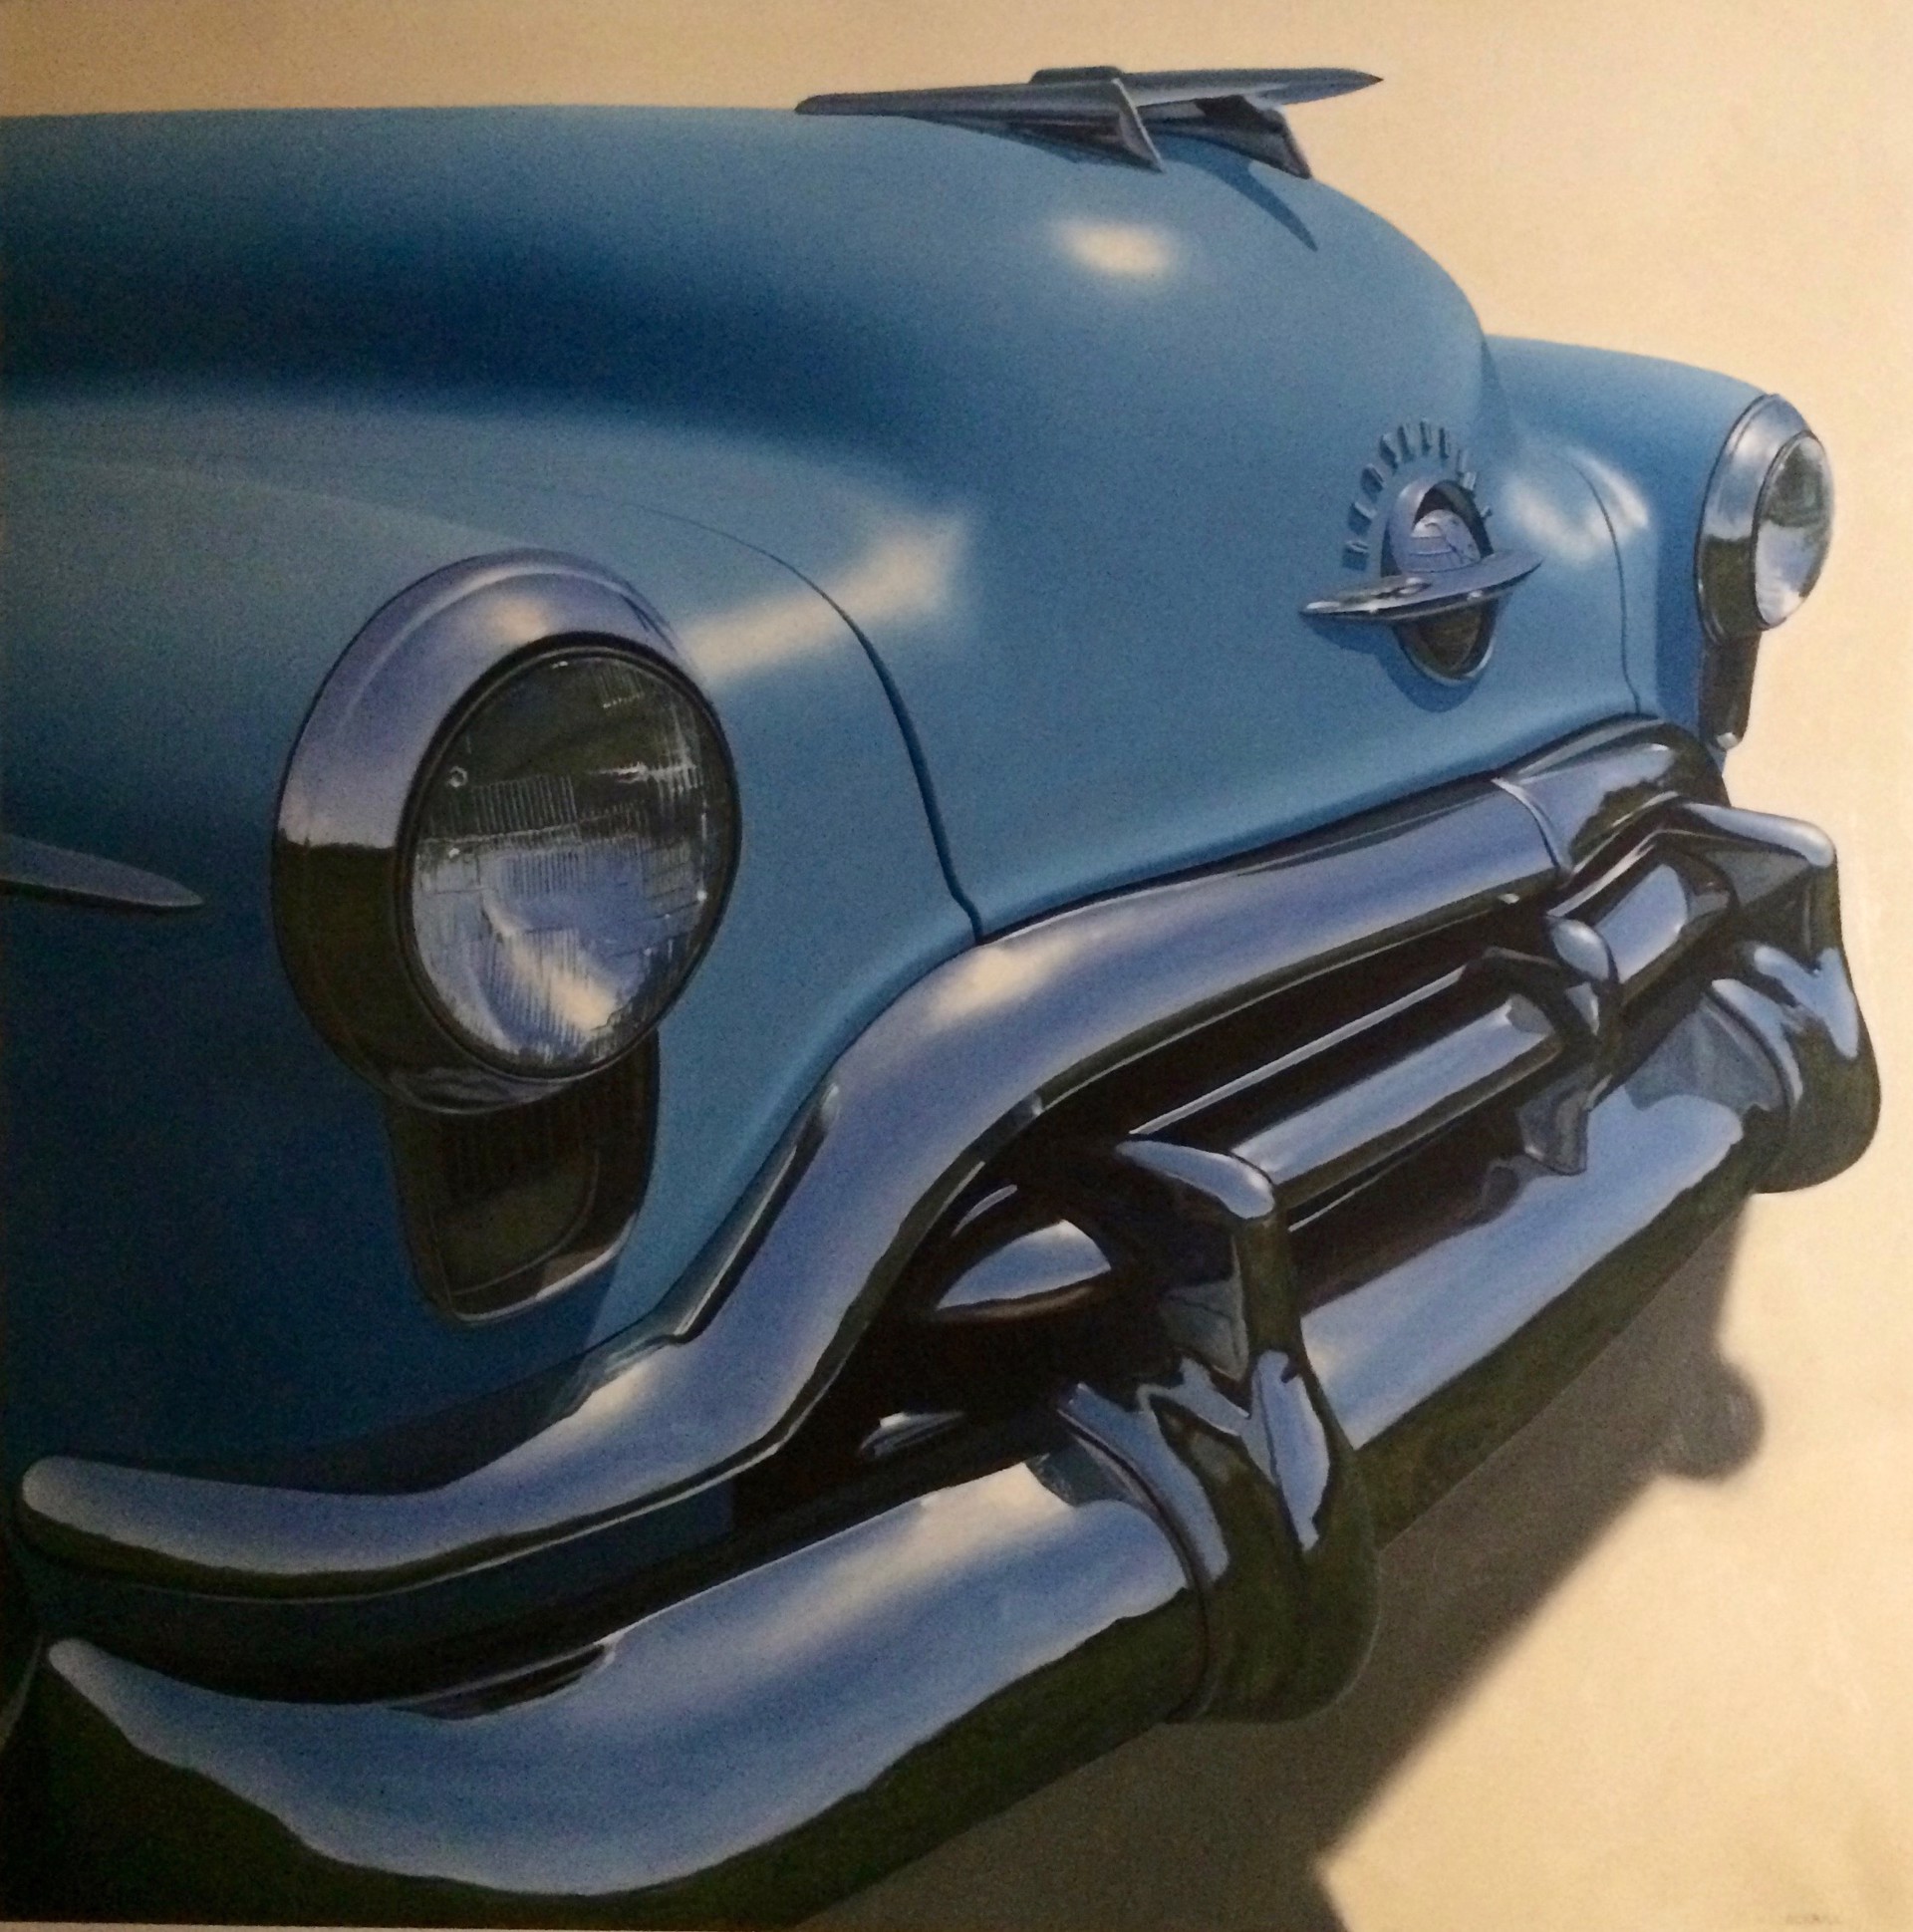 Rocket 88 by Anthony Ackrill